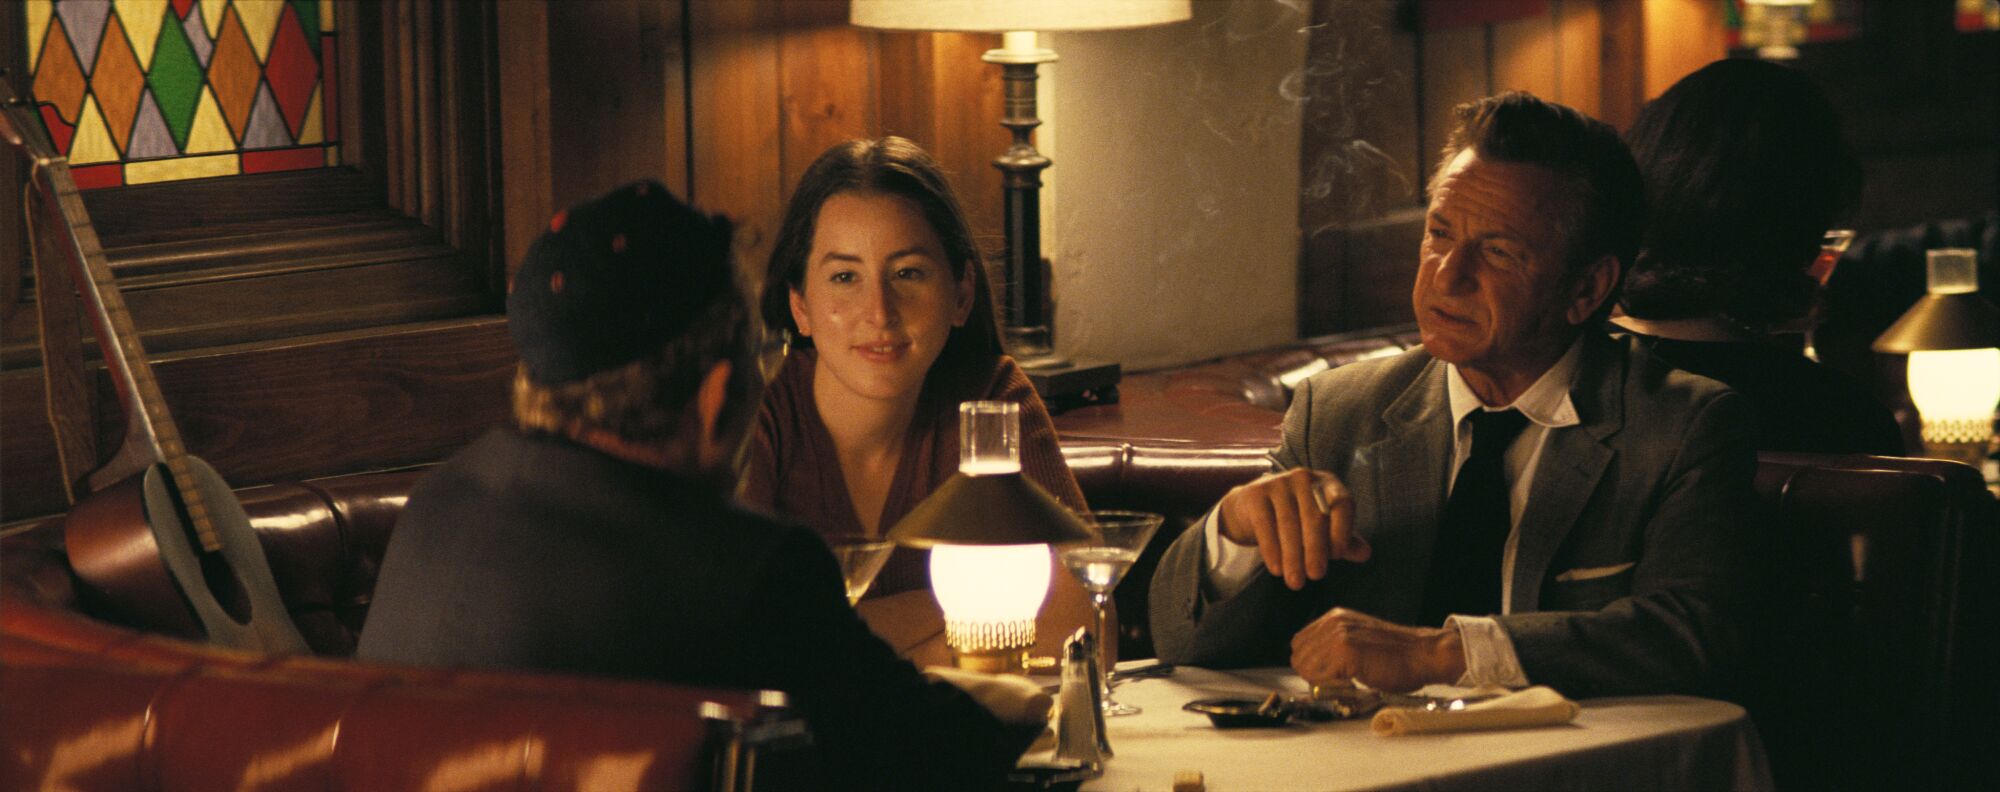  A young woman and two older men chat at a restaurant table in "Licorice Pizza."